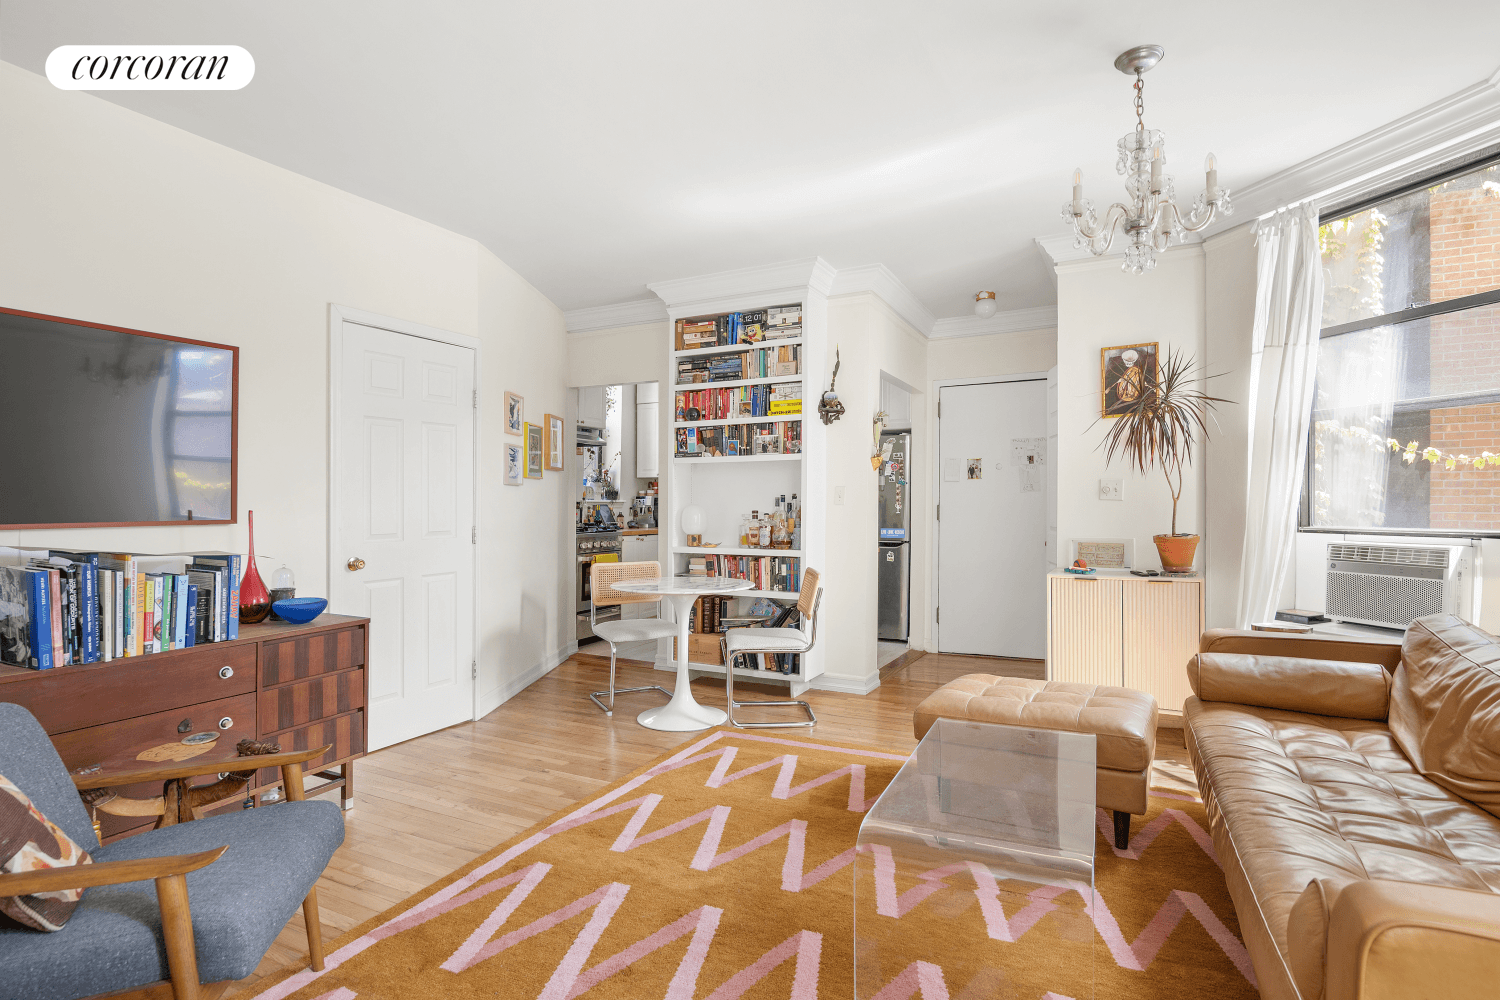 THIS HOME IS TRULY a GEM in one of the fastest growing neighborhoods in Brooklyn, Clinton Hill !